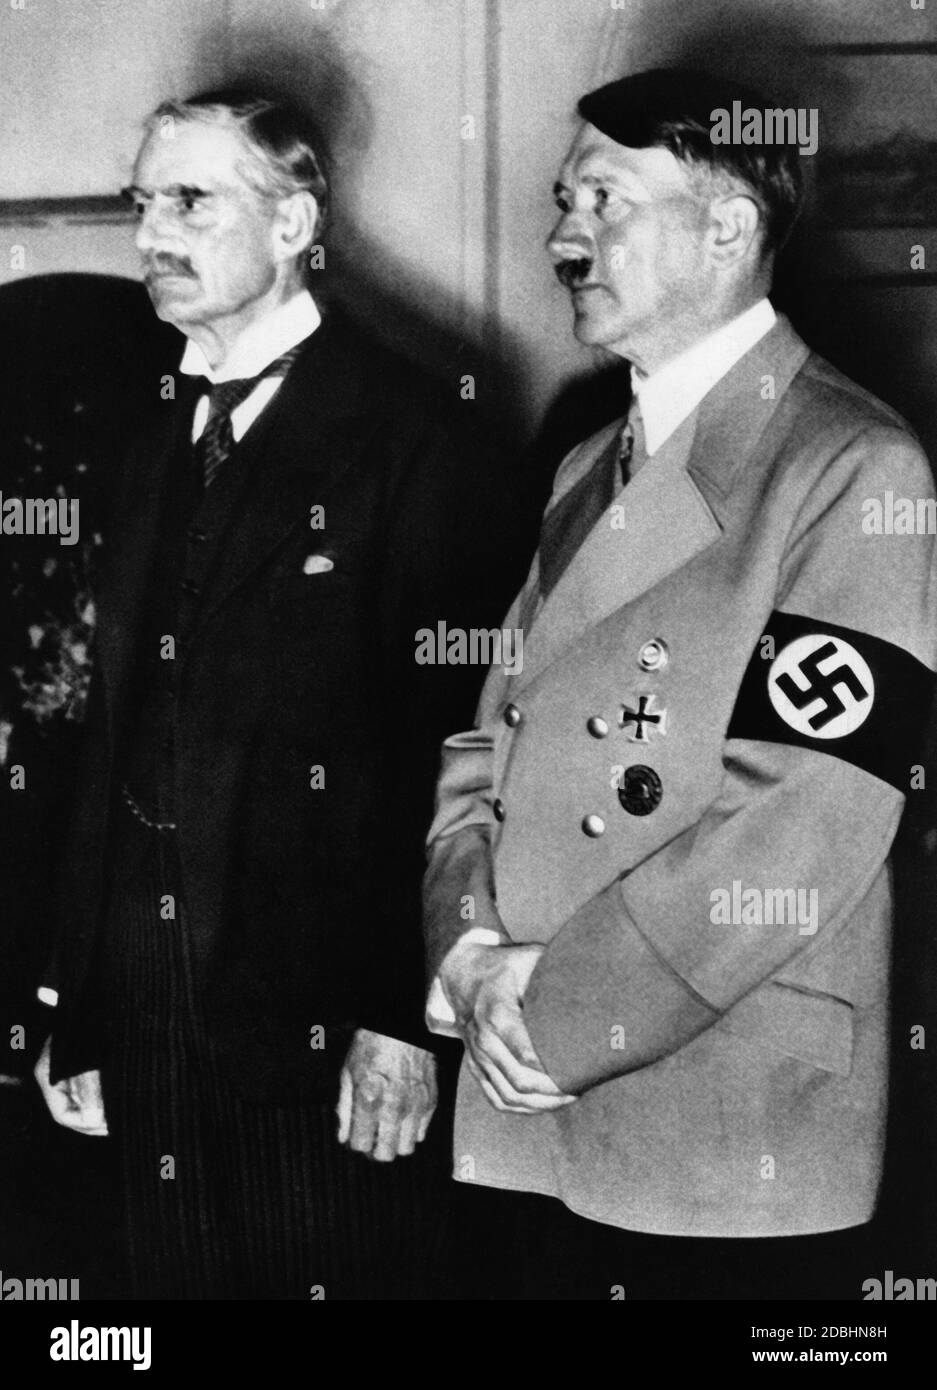 Chamberlain and Hitler during the Munich Conference. Stock Photo